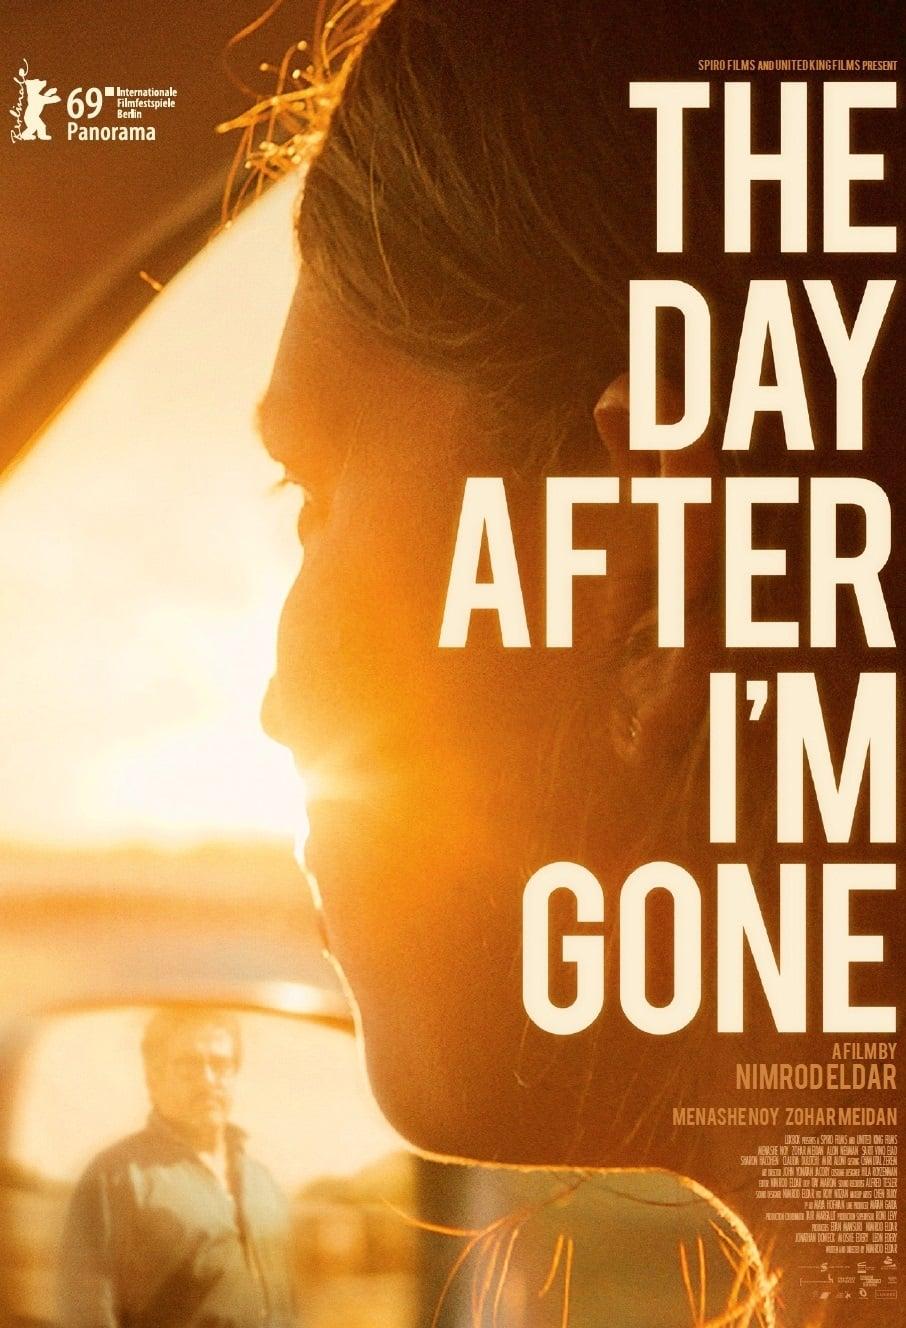 The Day After I'm Gone poster